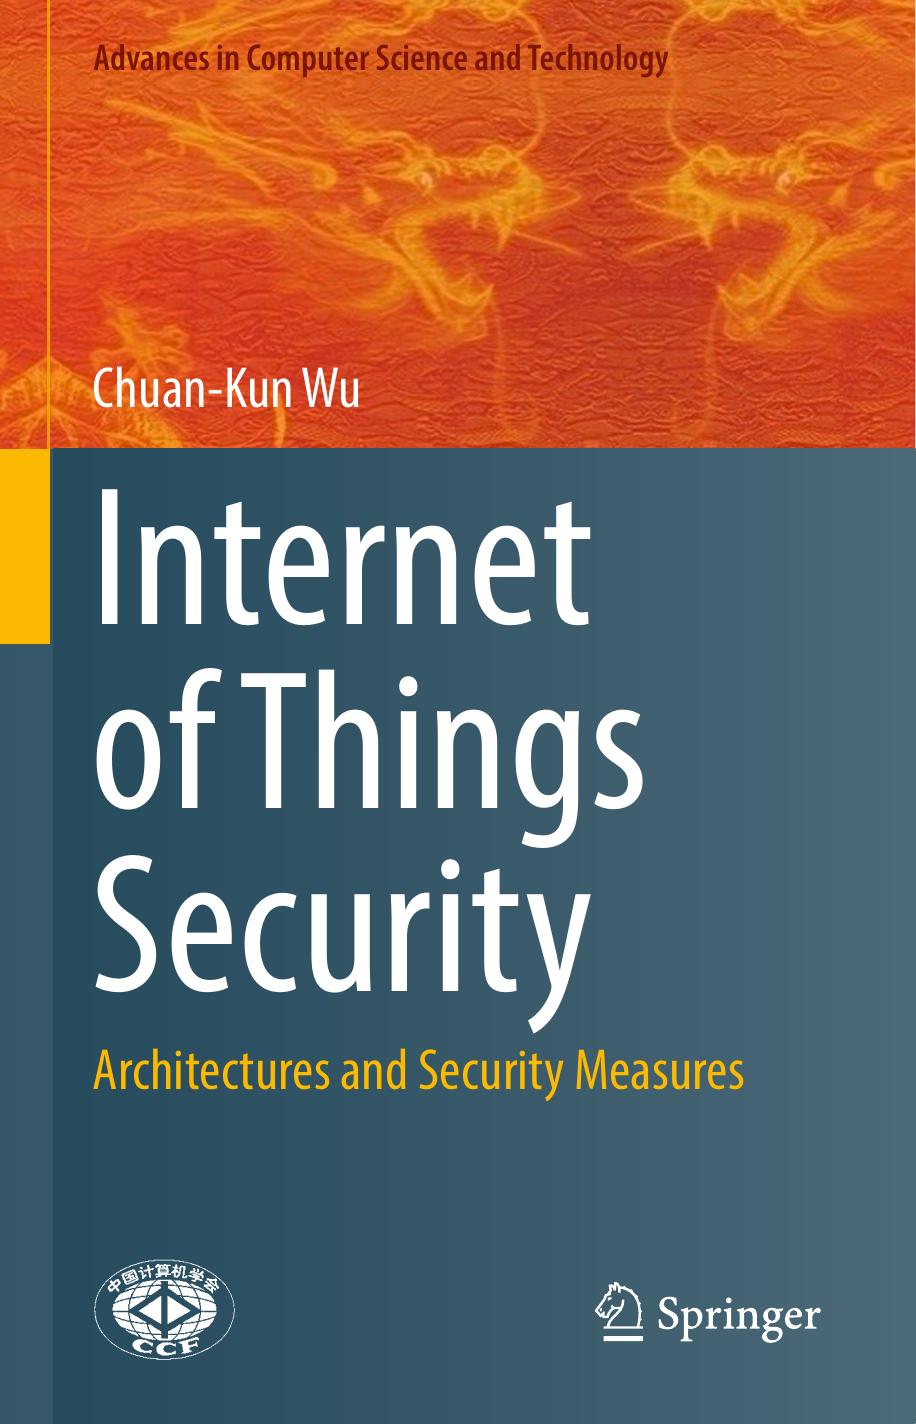 Internet of Things Security  Architectures and Security Measures, 2021)